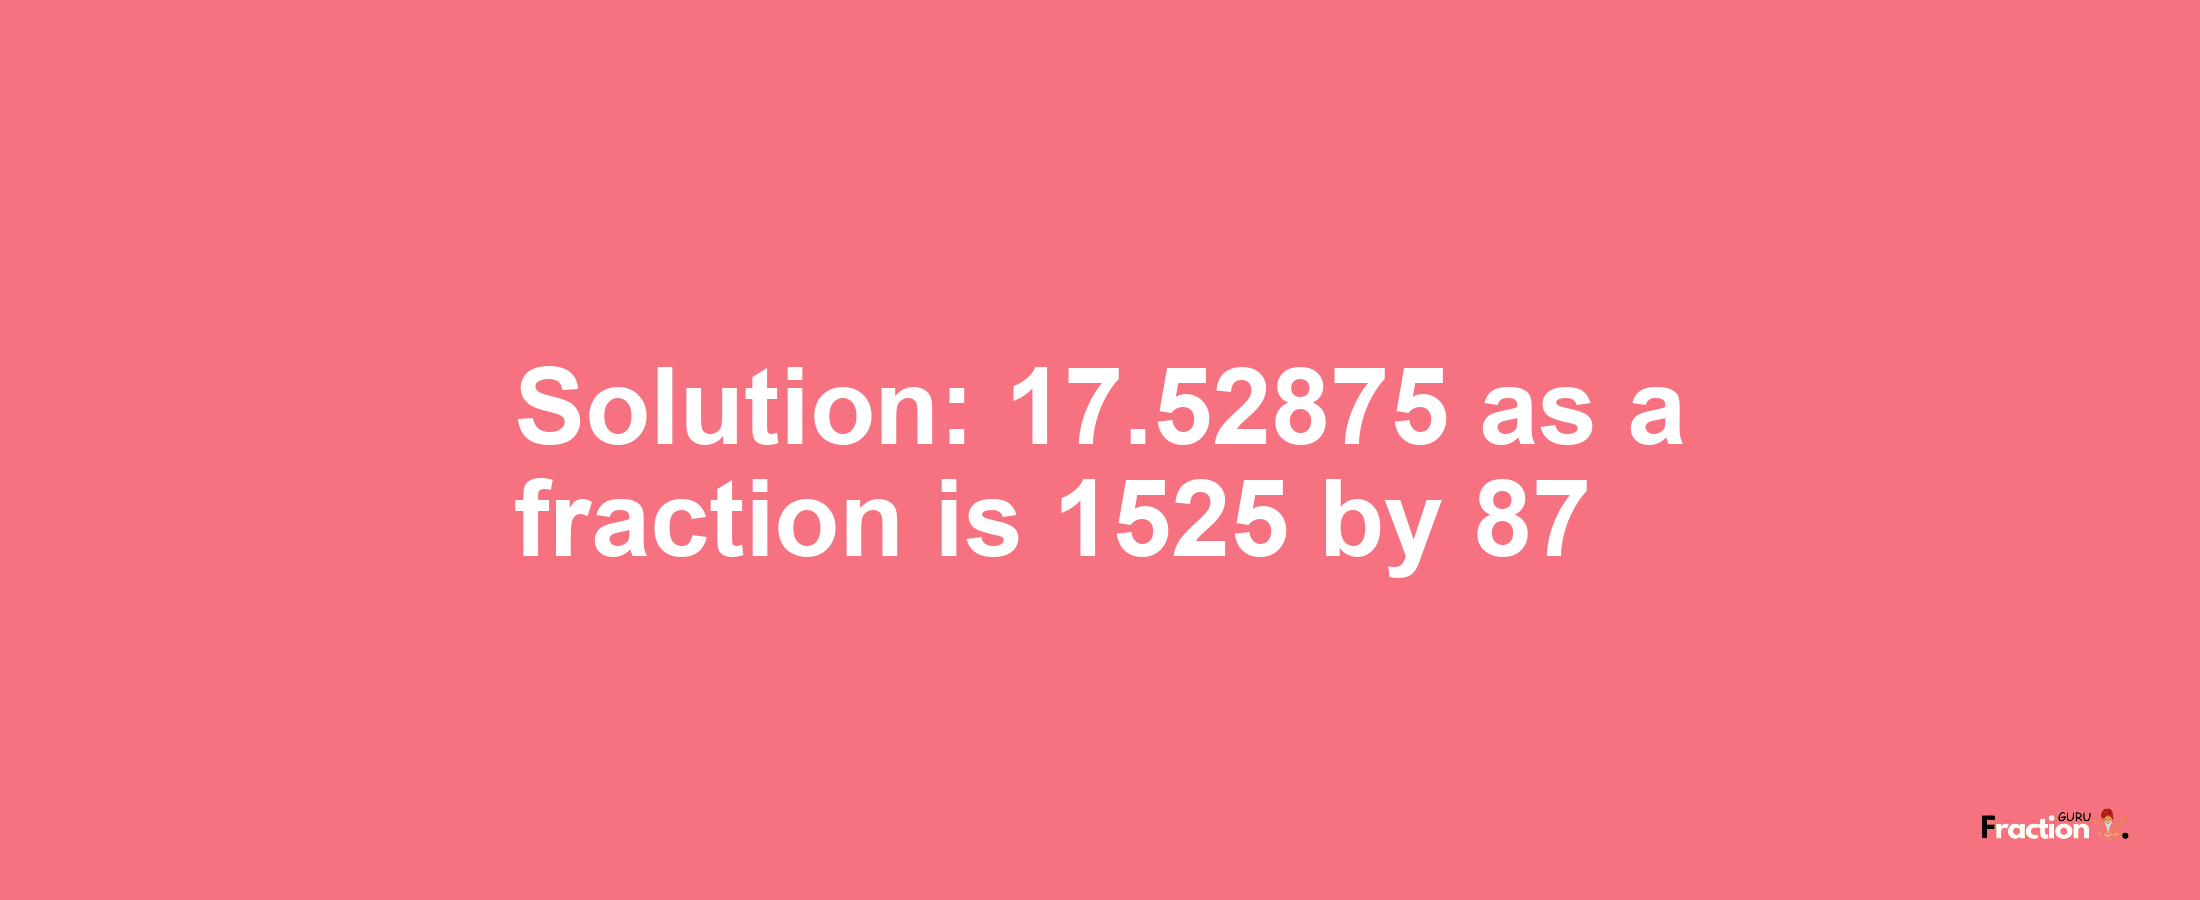 Solution:17.52875 as a fraction is 1525/87